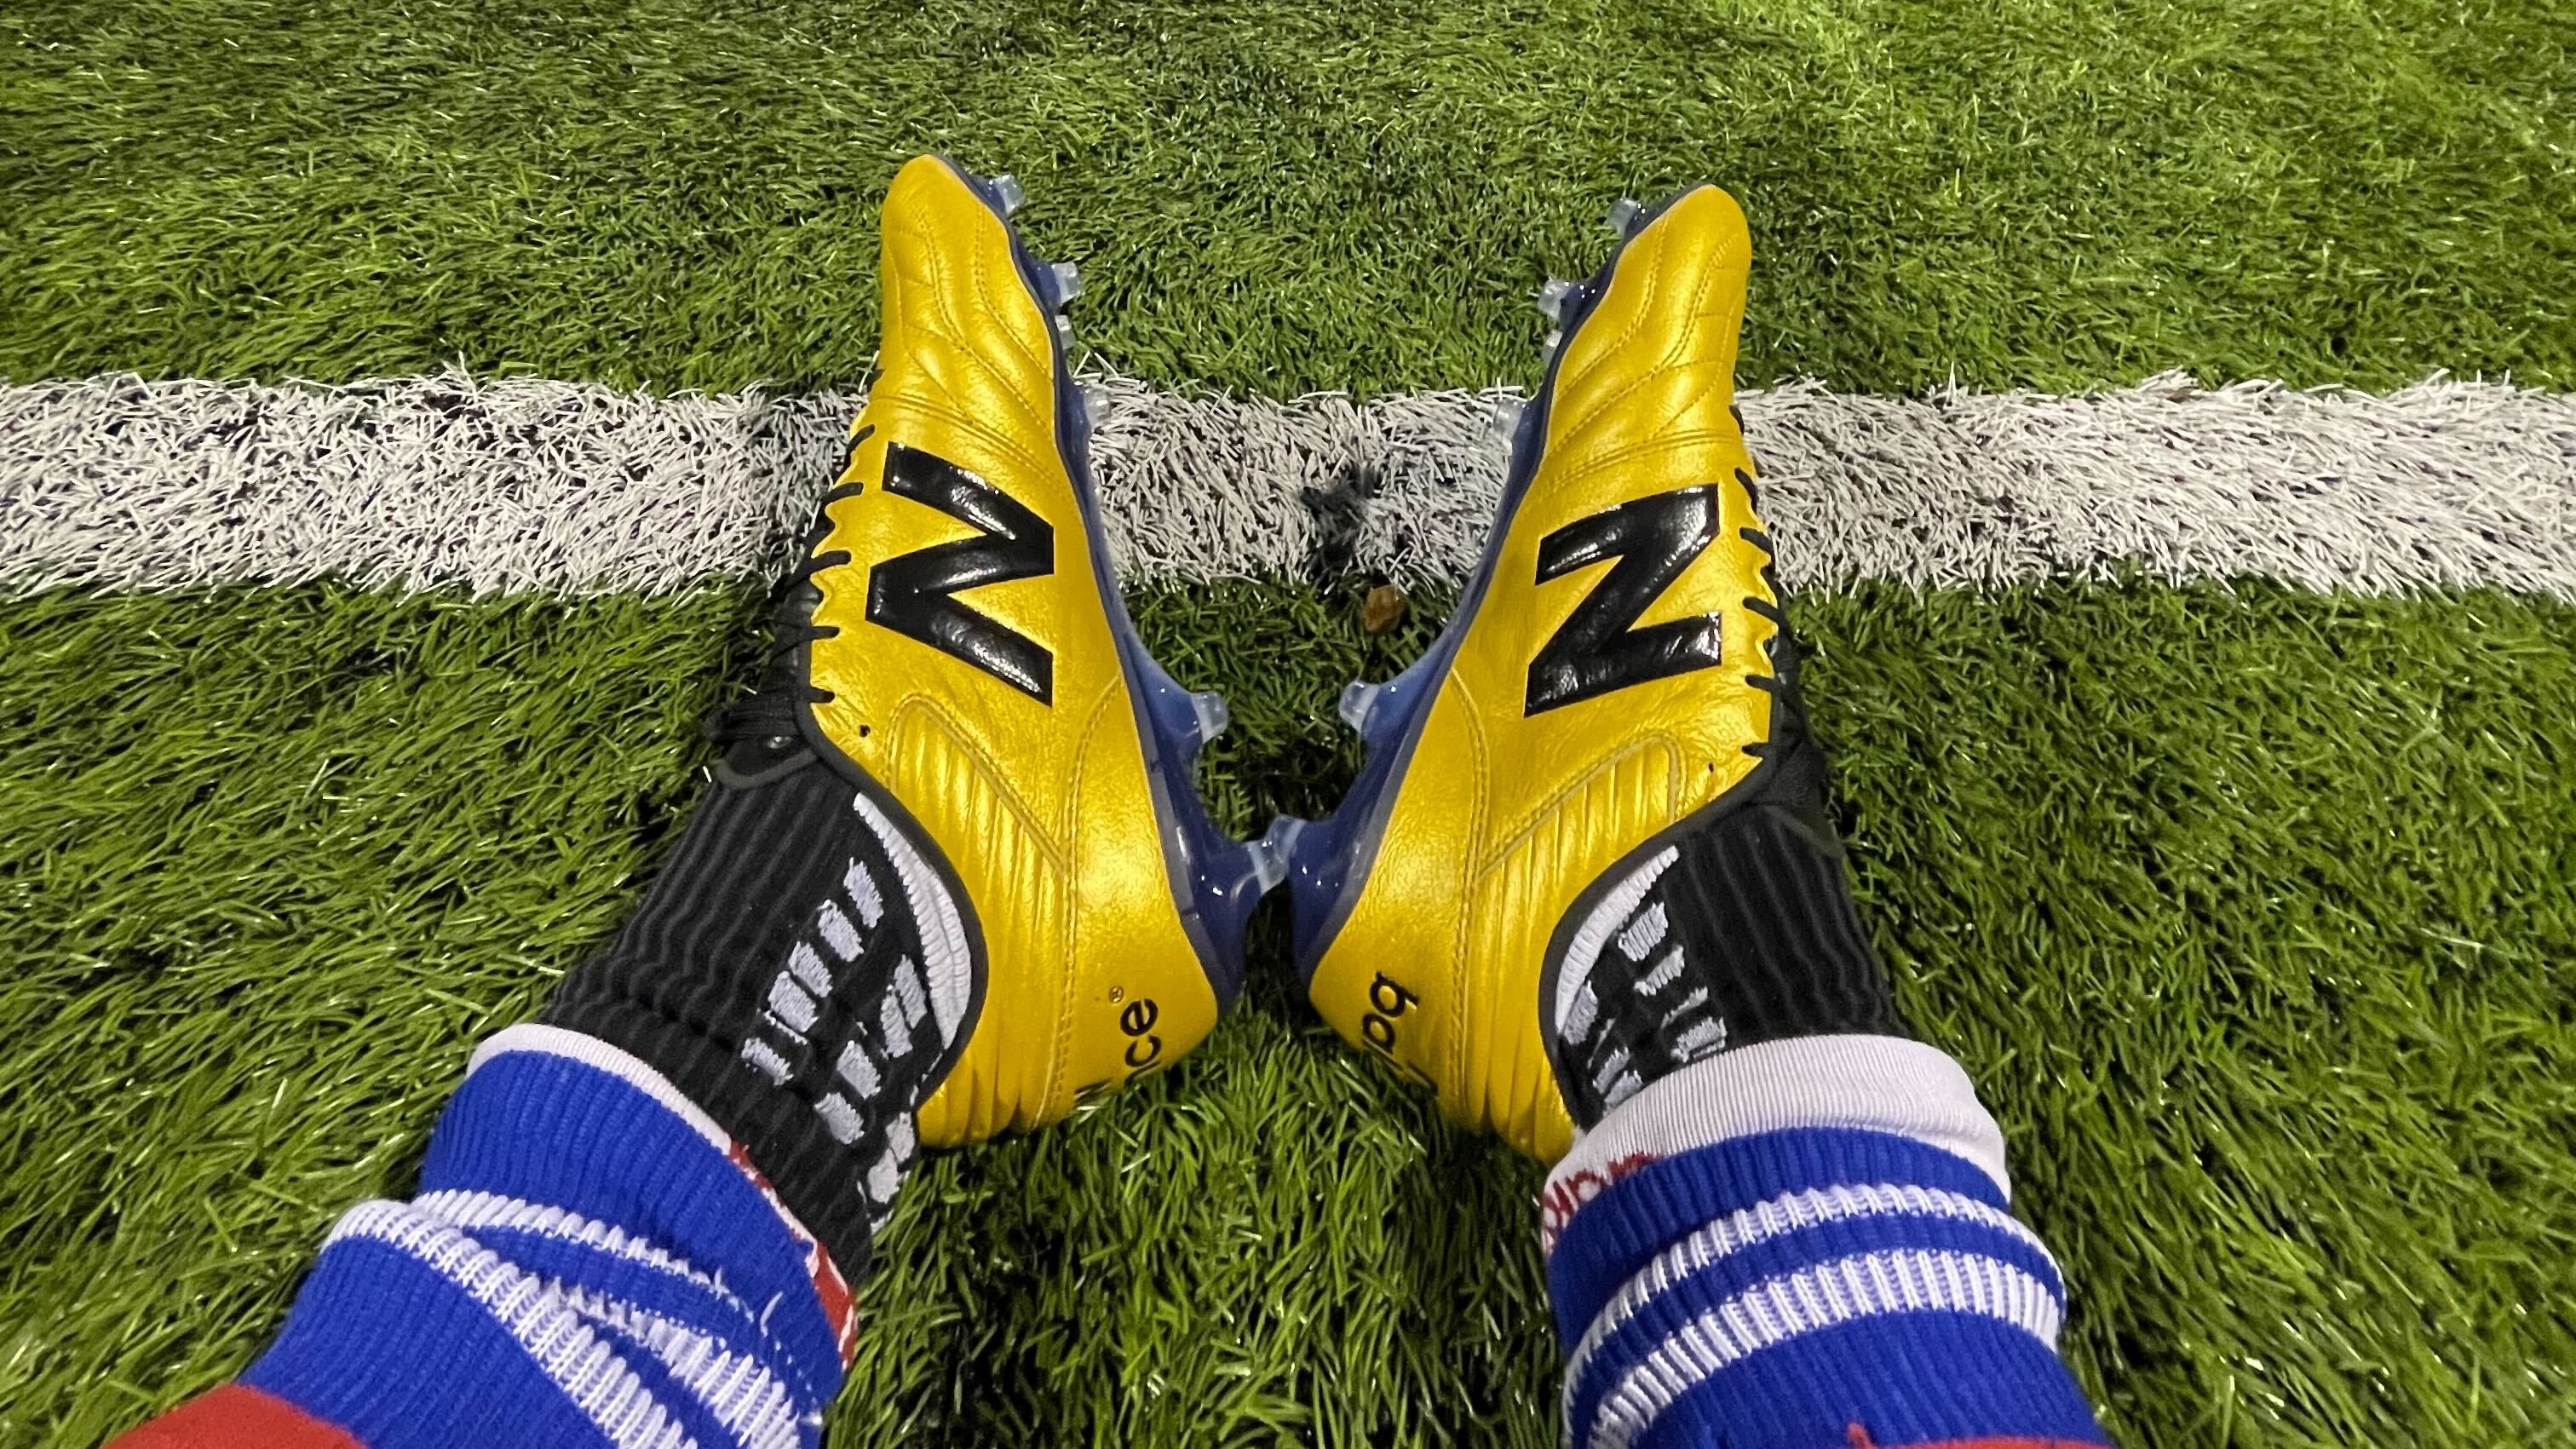 New Balance 442 v2 football boots review: A comfortable no-thrills boot  that won't cost you the world